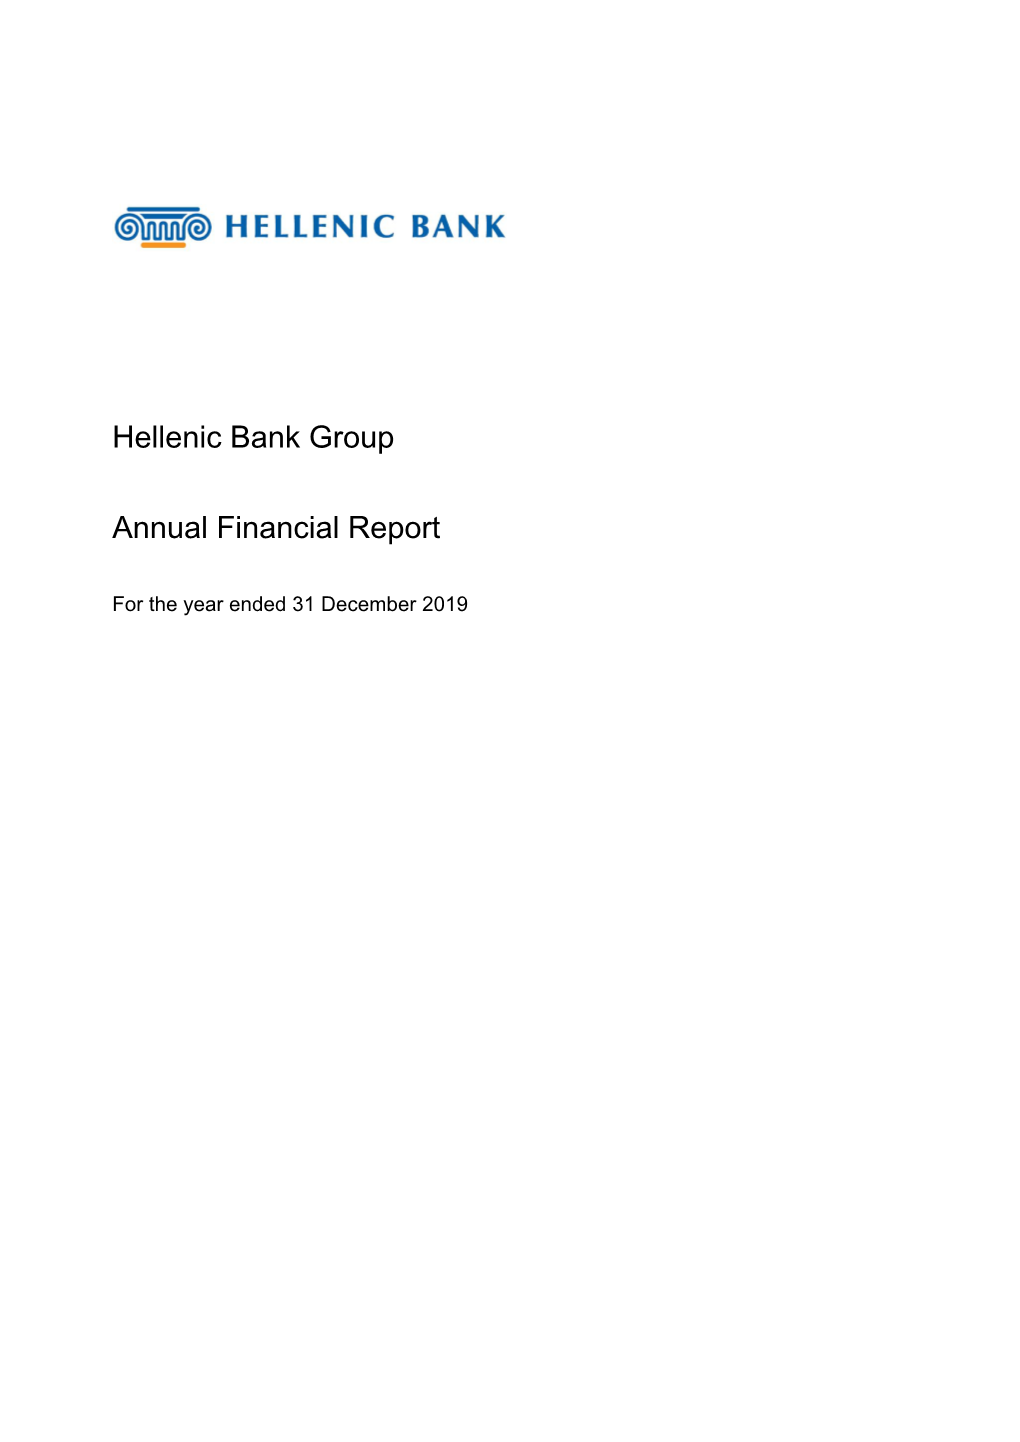 Hellenic Bank Group Annual Financial Report for the Year Ended 31 December 2019 CONTENTS